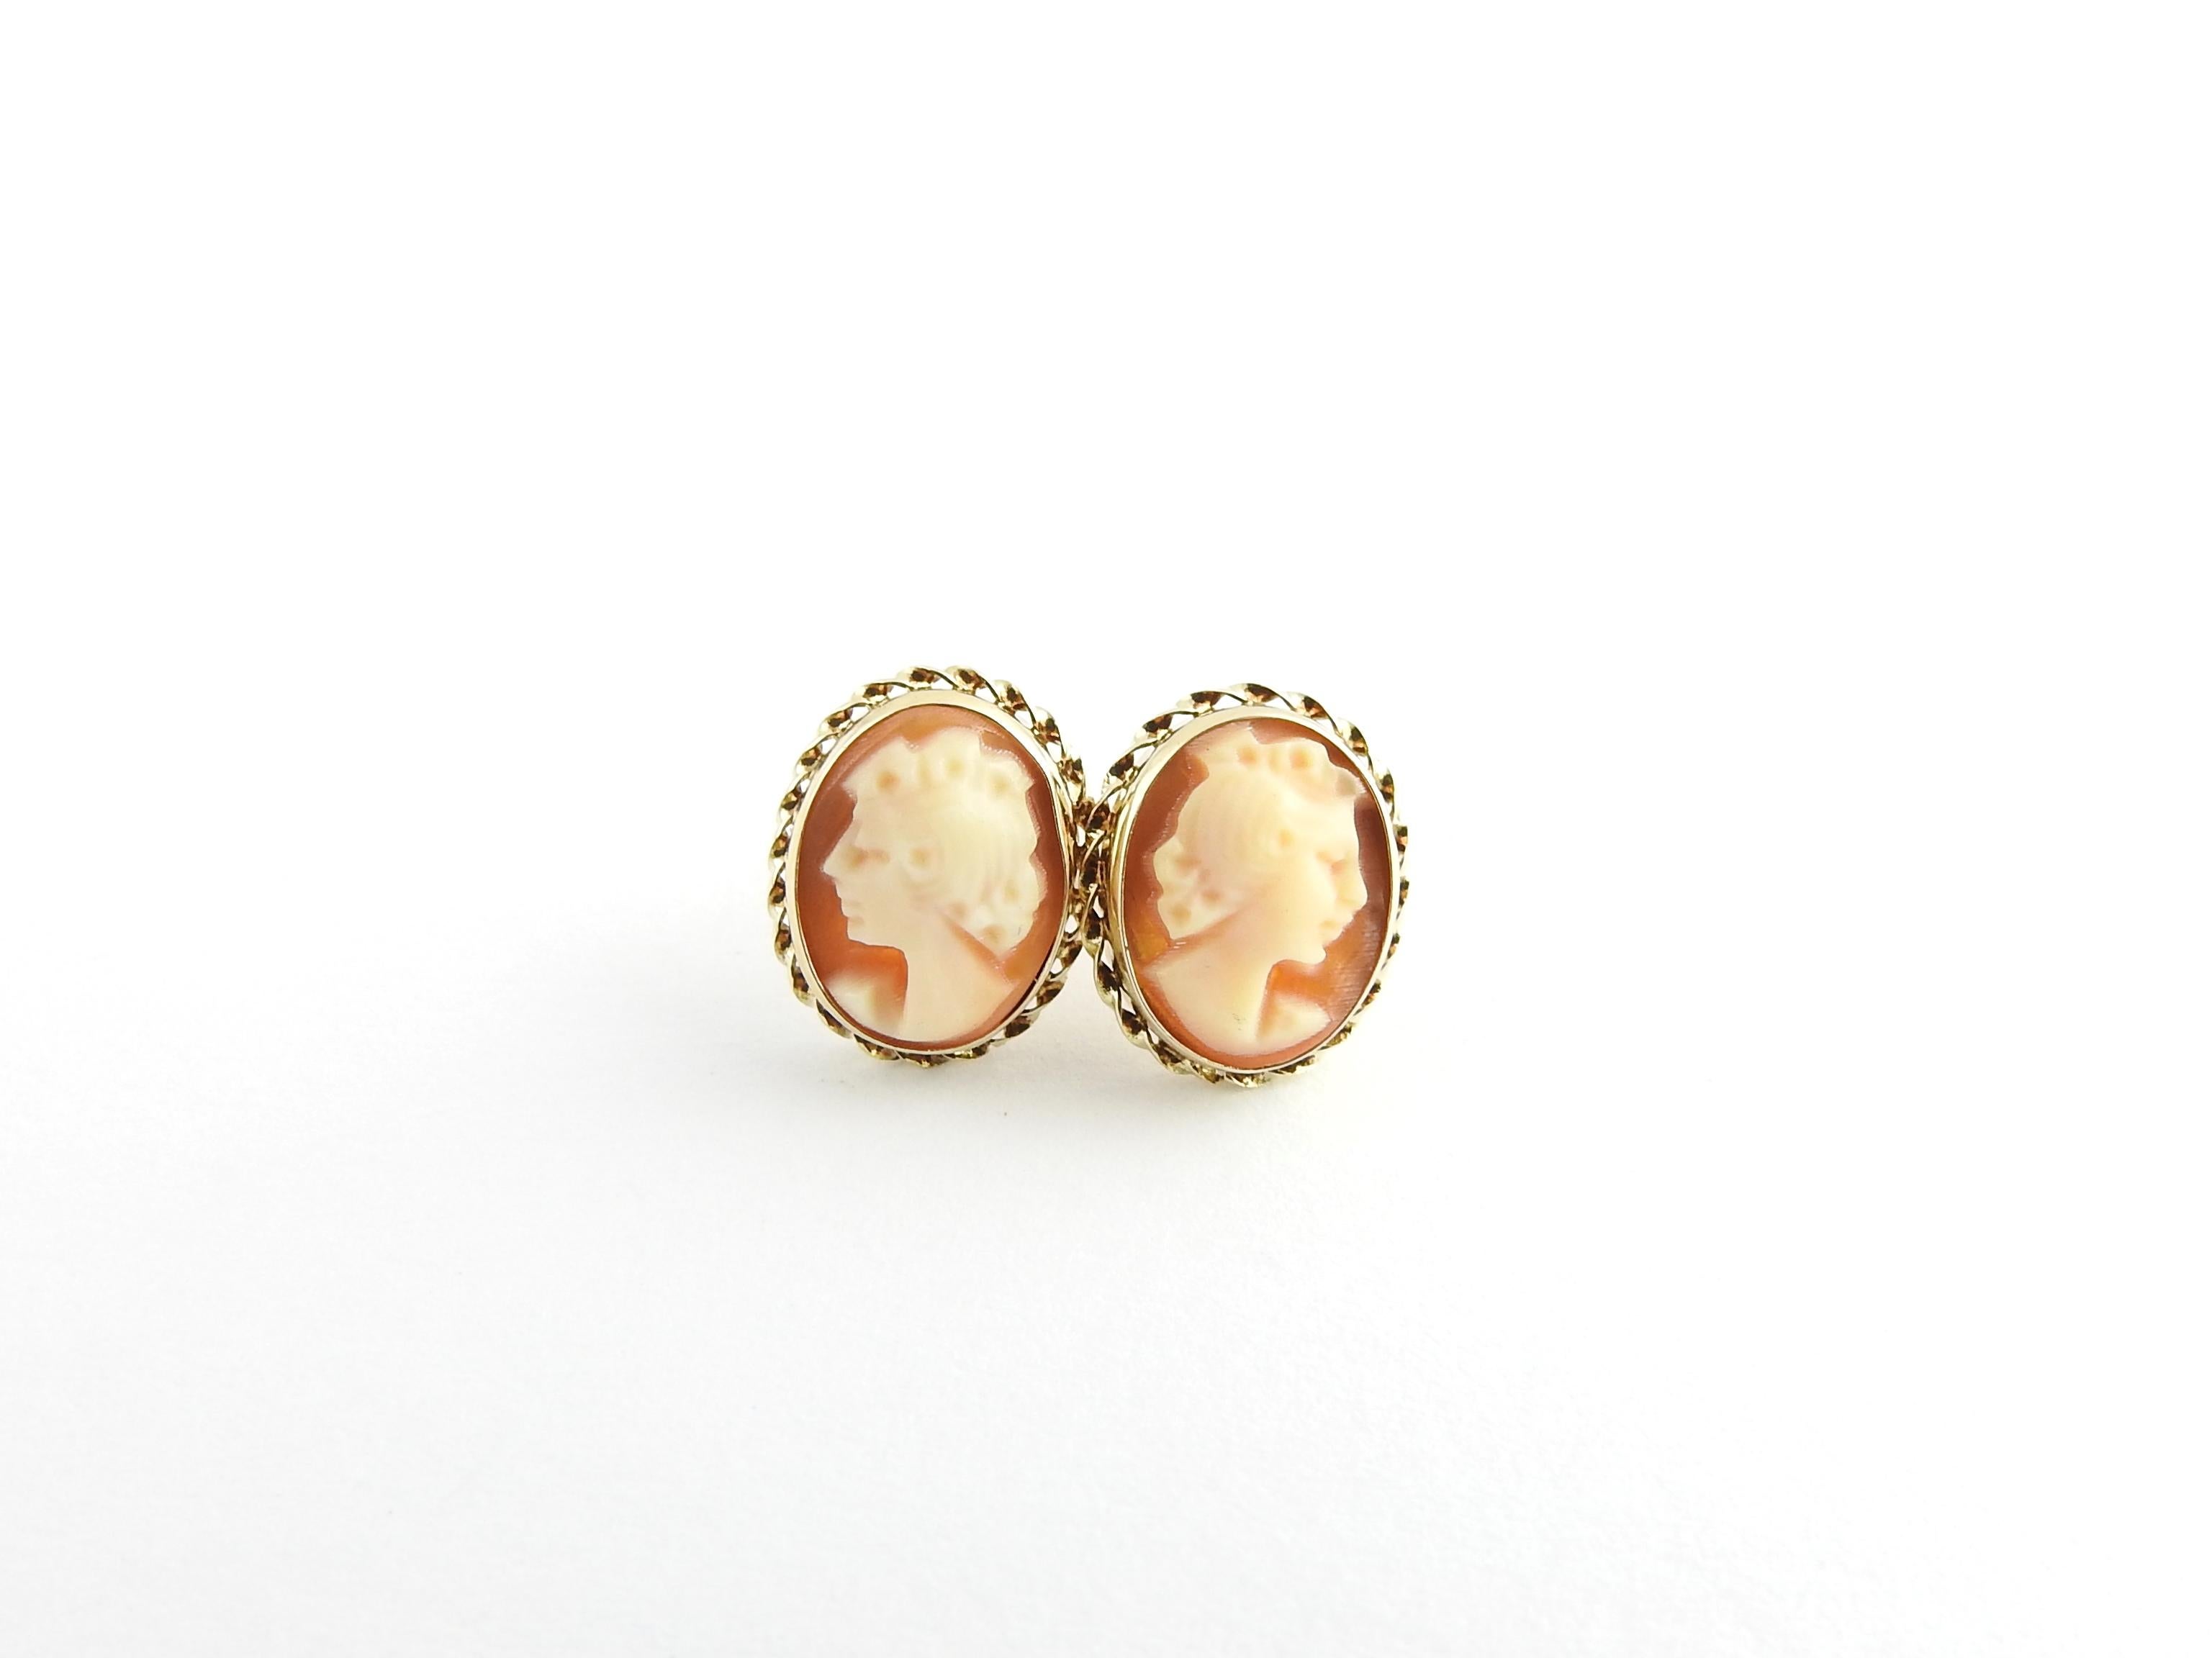 Vintage 14 Karat Yellow Gold Cameo Earrings

These lovely cameo earrings each feature a lovely lady in profile framed in beautifully detailed 14K yellow gold. Push back closures.

Size: 12 mm x 9 mm

Weight: 1.0 dwt. / 1.7 gr.

Acid tested for 14K